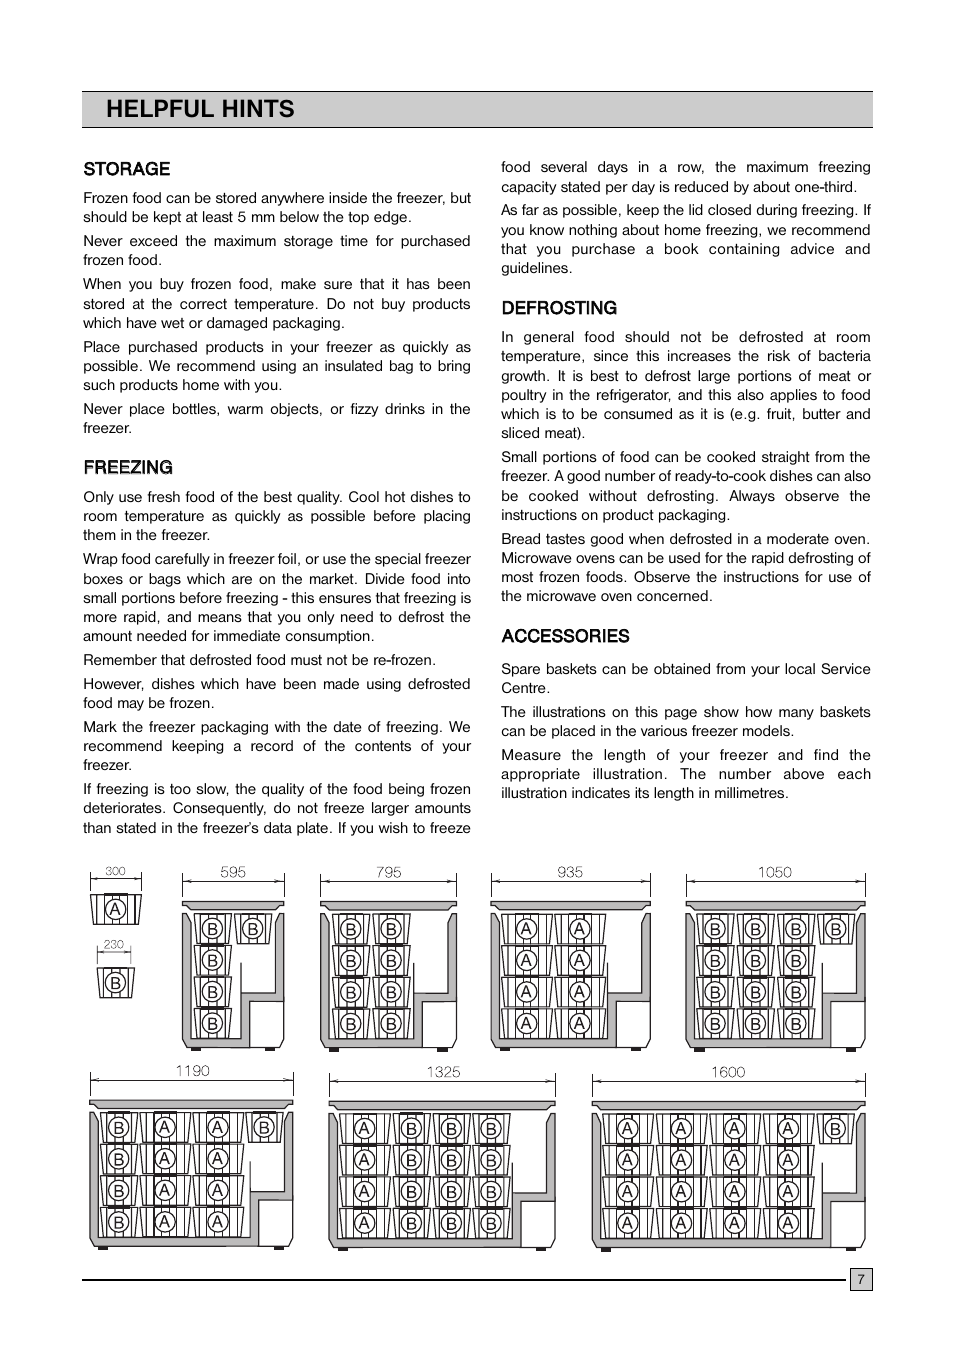 Helpful hints | FRIGIDAIRE FCFH 183 BW User Manual | Page 7 / 11